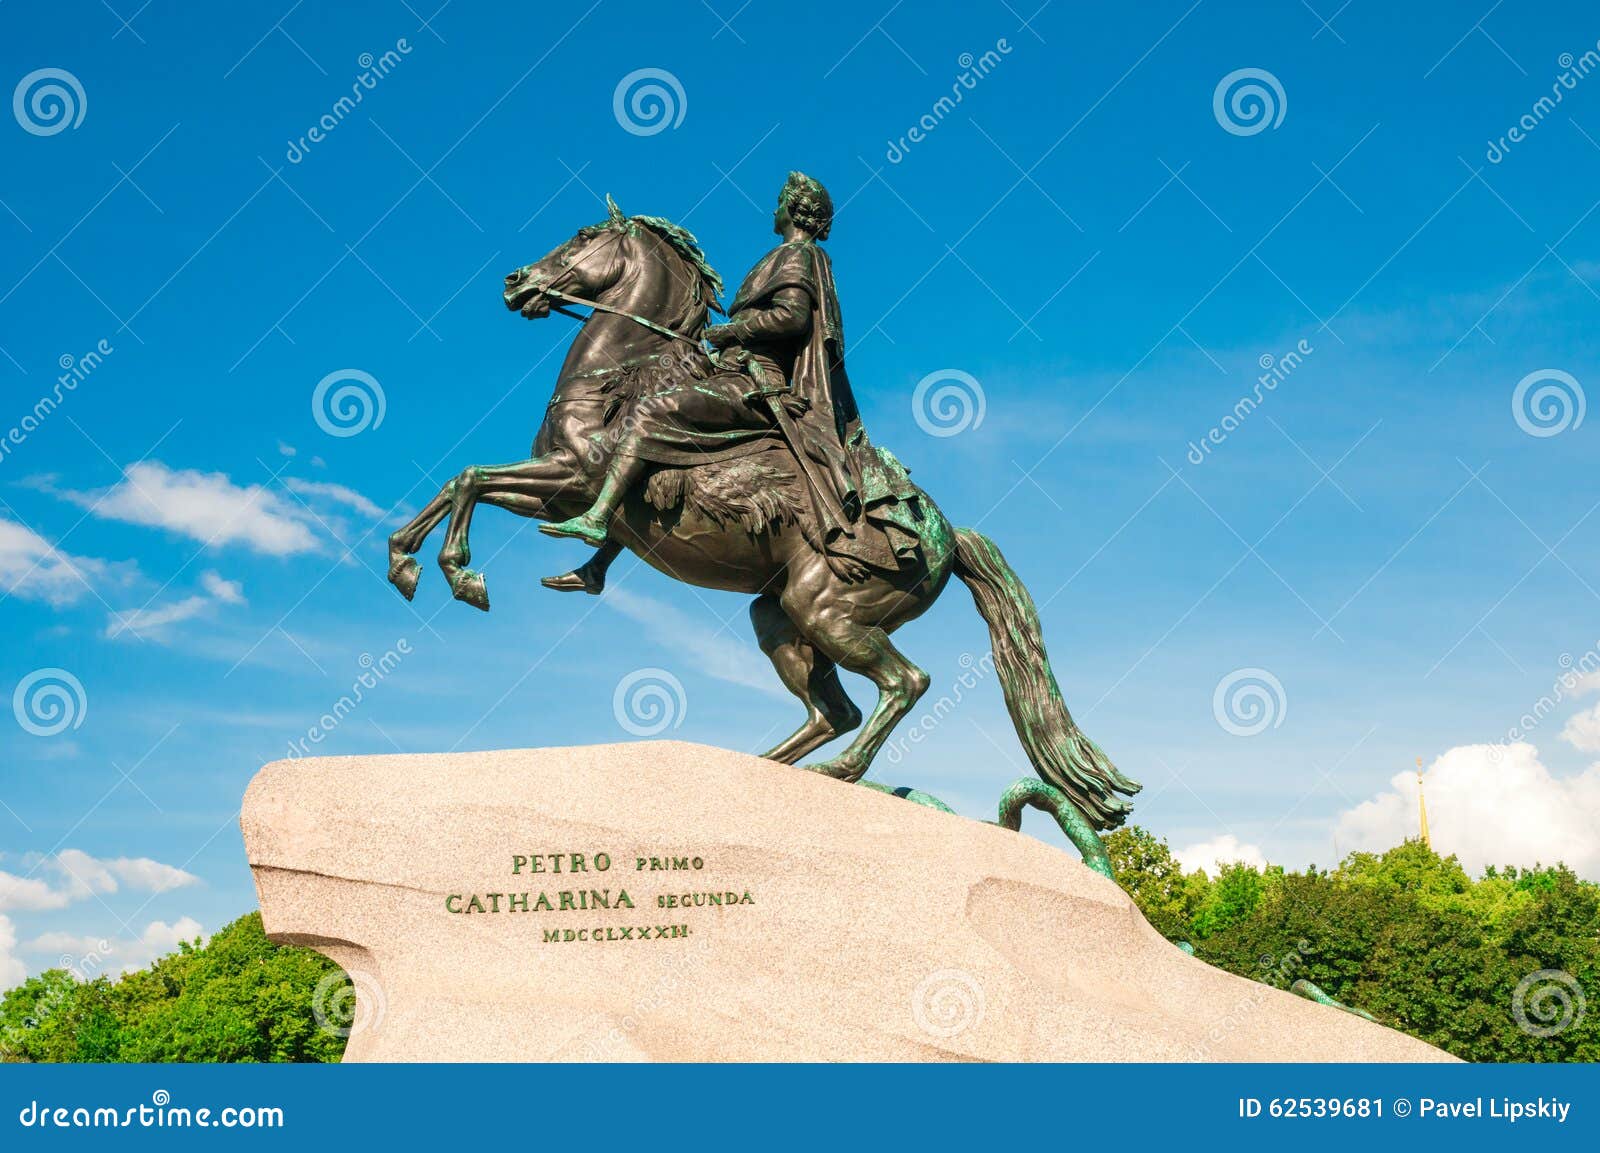 ST. PETERSBURG, RUSSIA - JULY 26, 2015: Monument to Peter the Great(the Bronze Horseman) on the Senate Square in Saint Petersburg, Russia.